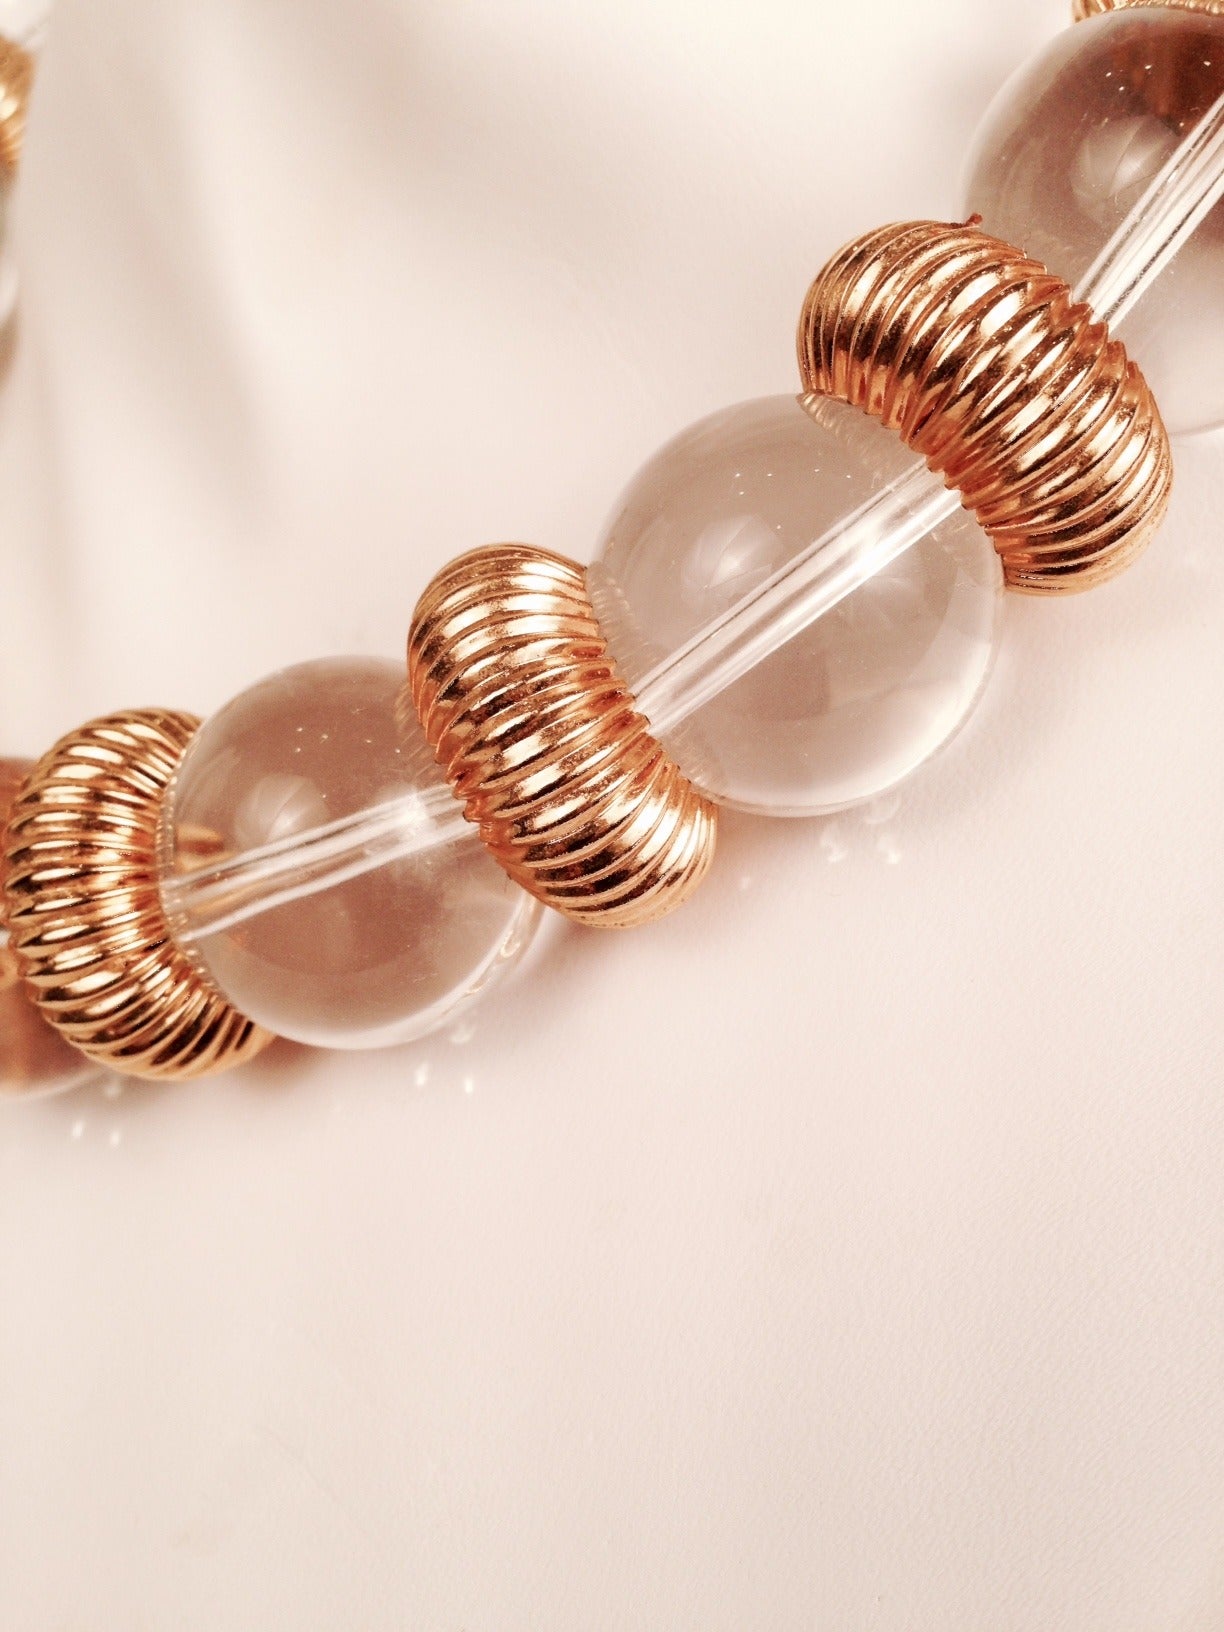 Kenneth Lane Lucite Choker features impressive, clear lucite beads separated by ribbon, gold-tone rondelles.  Easy and breezy!  Perfect for travel.  Simply beautiful, timeless...ageless!